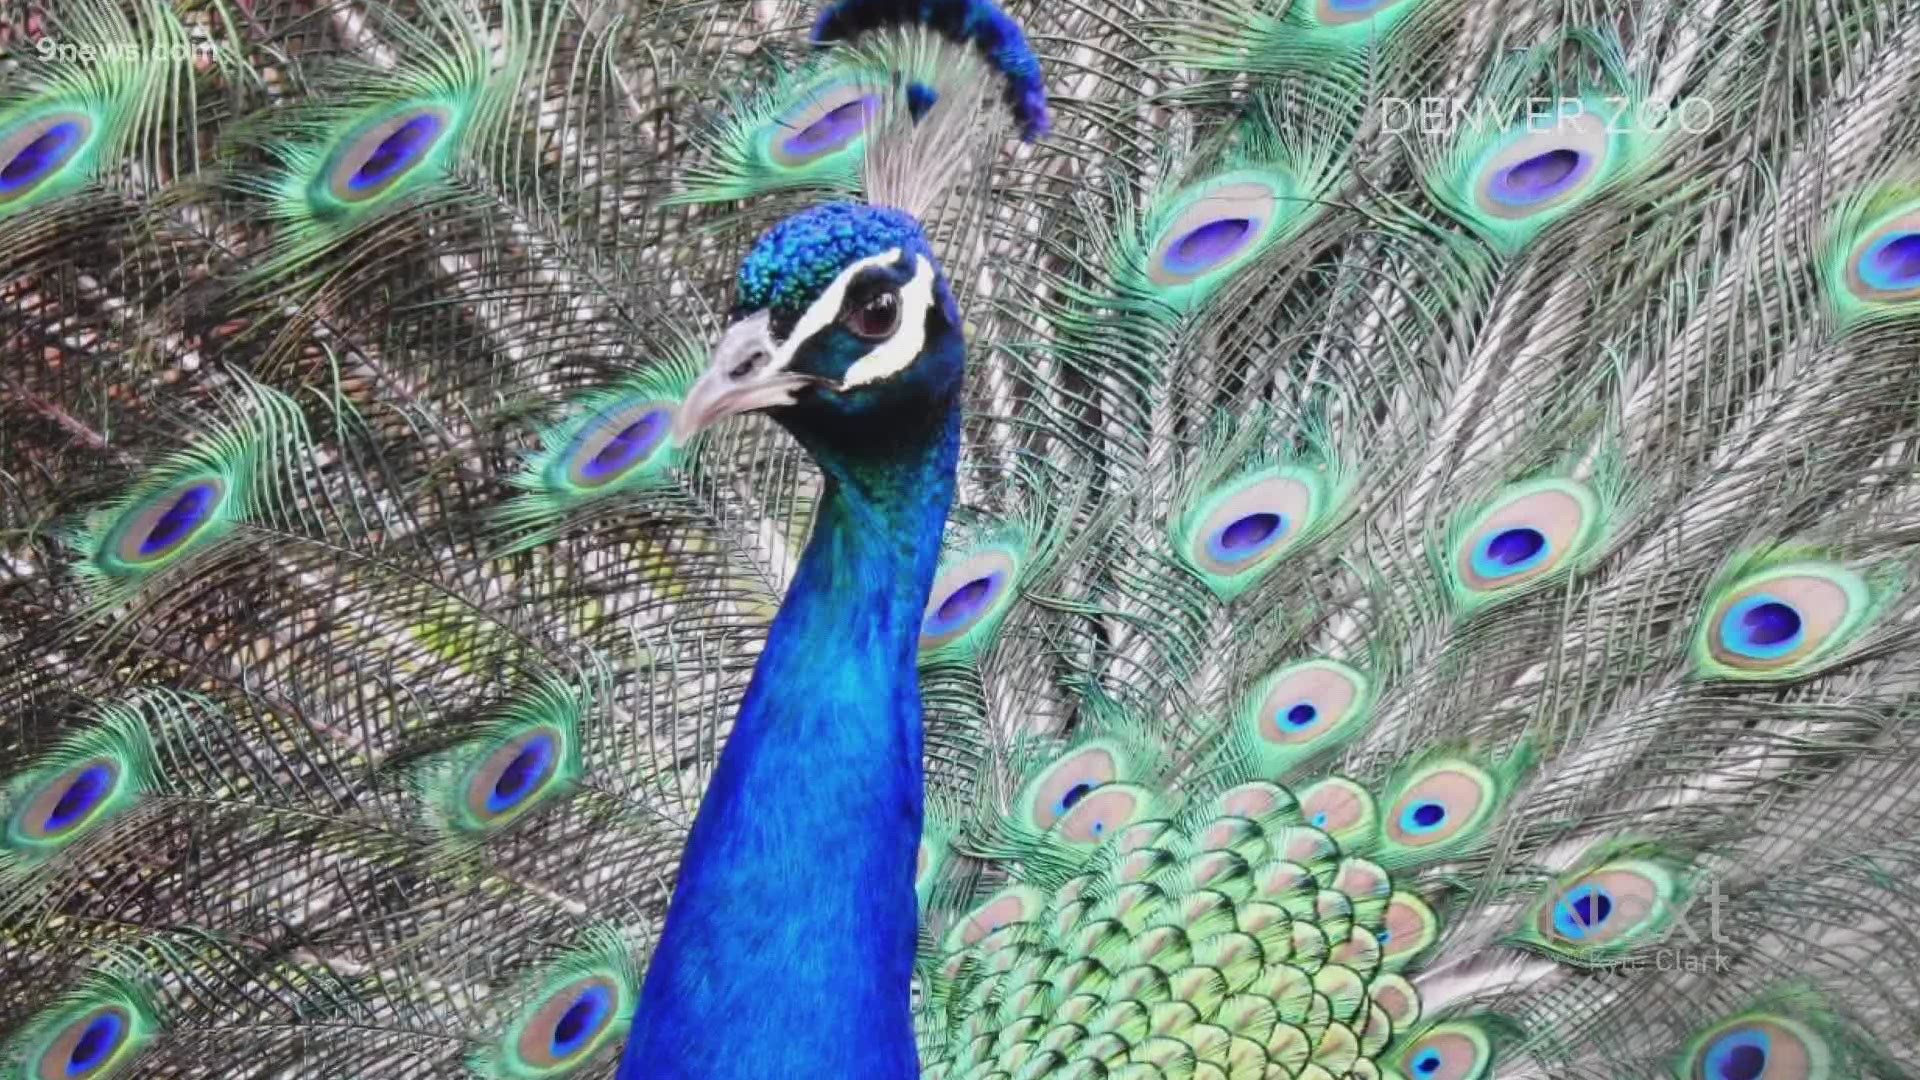 how to turn off closed captioning on peacock